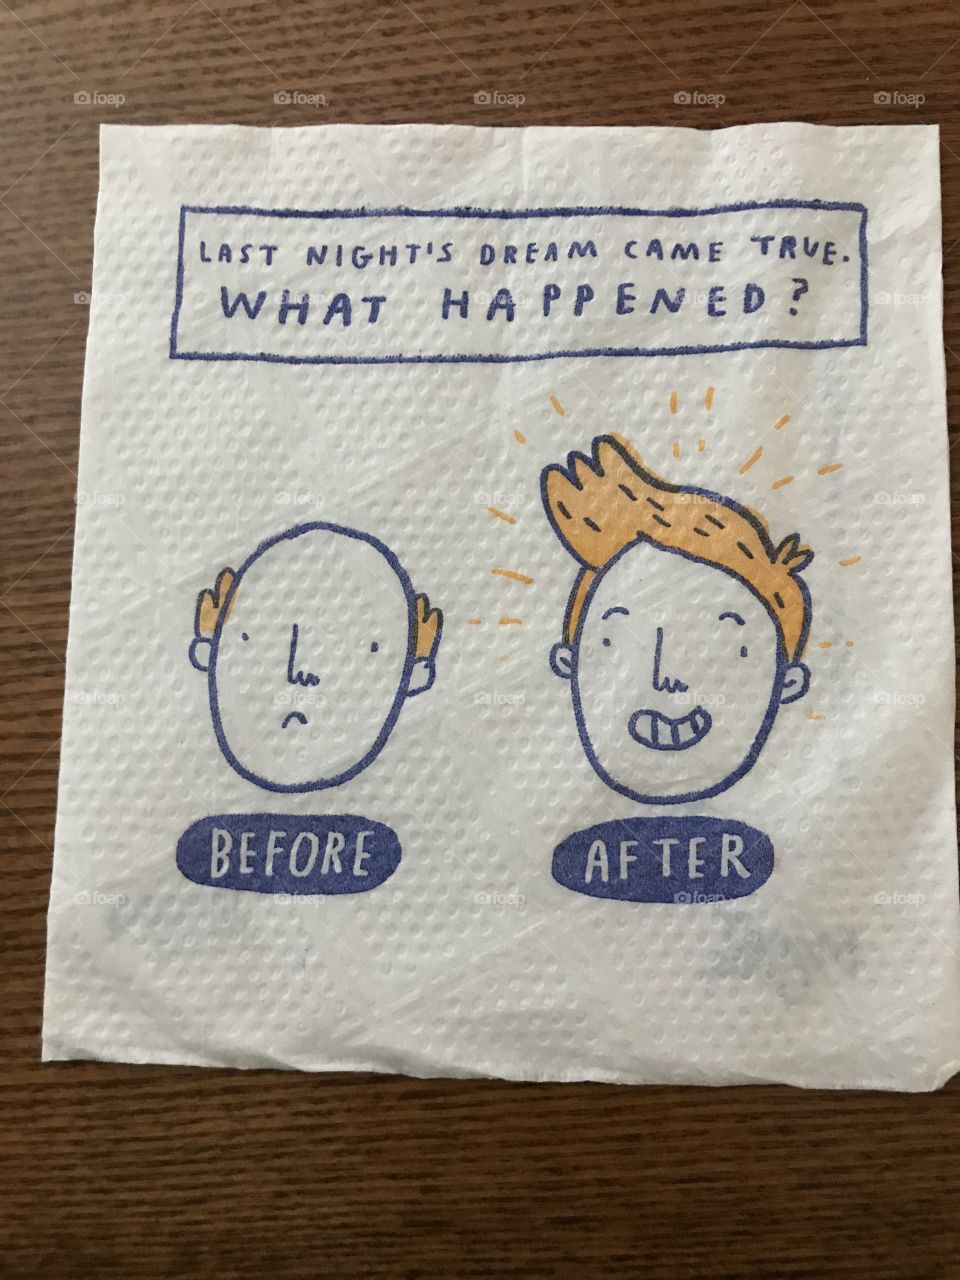 Funny napkins make u not want to whip ur face and use them lol